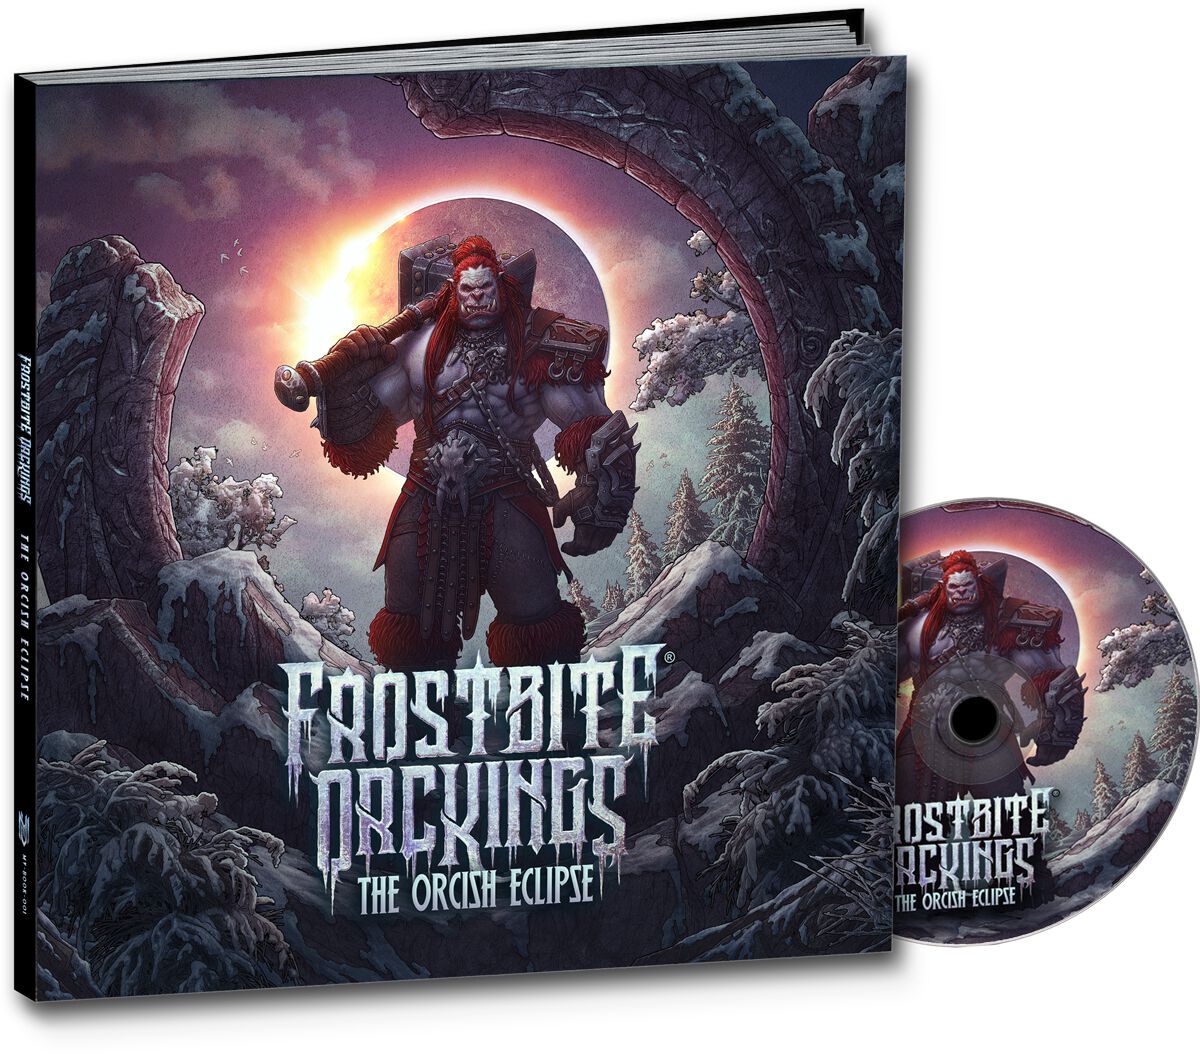 Frostbite Orckings - The Orcish Eclipse - CD - multicolor von Frostbite Orckings